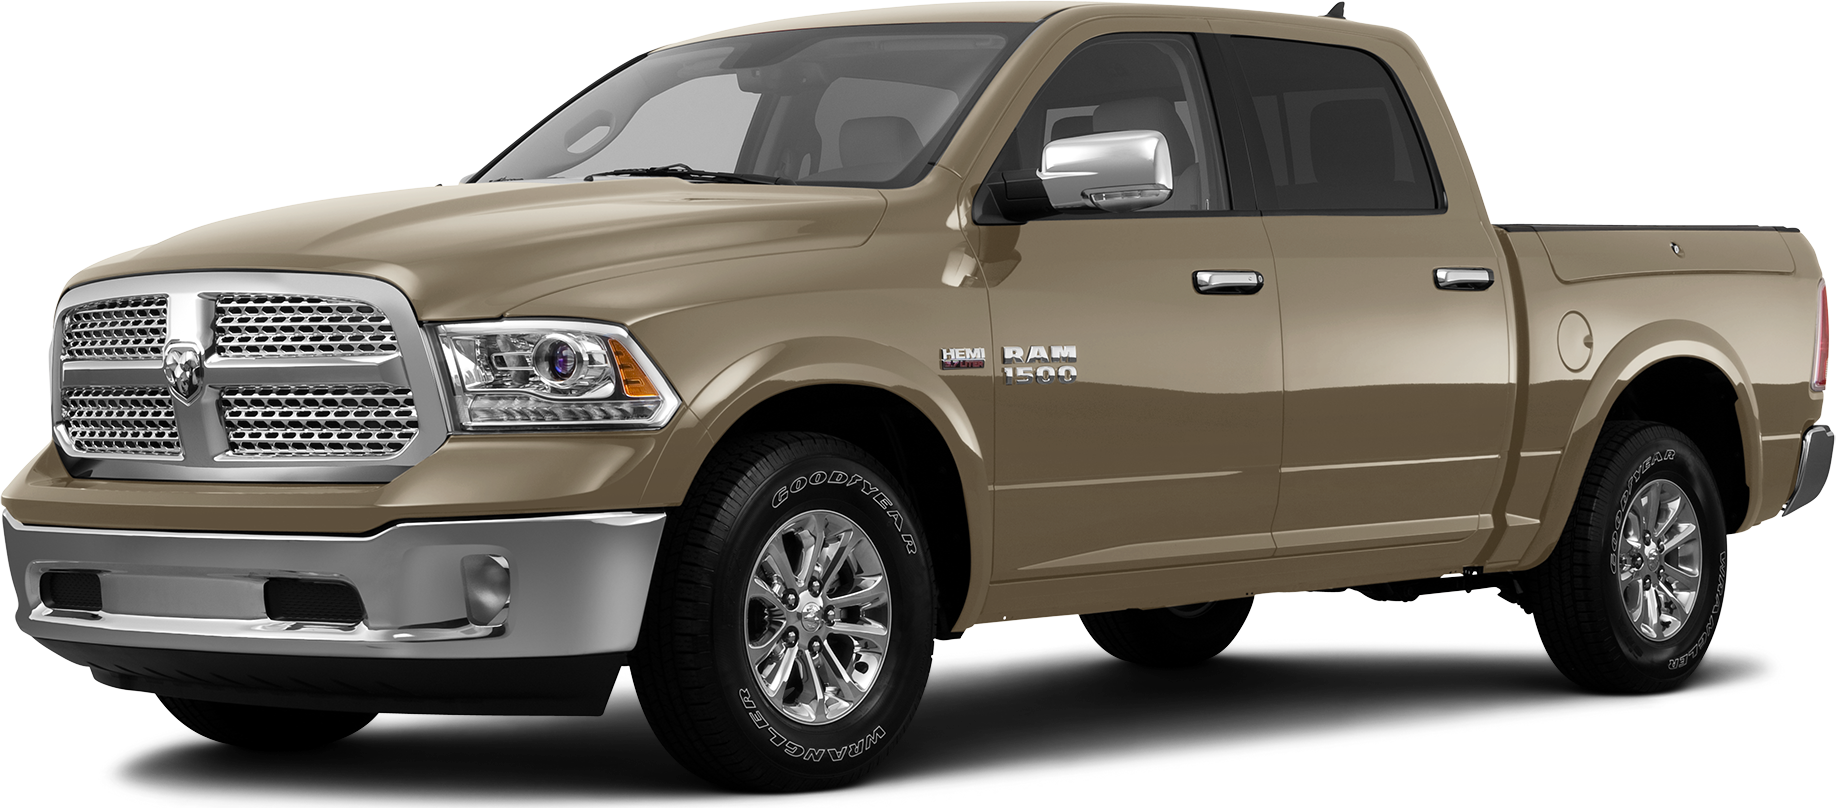 2013 RAM 1500 Truck: Latest Prices, Reviews, Specs, Photos and Incentives